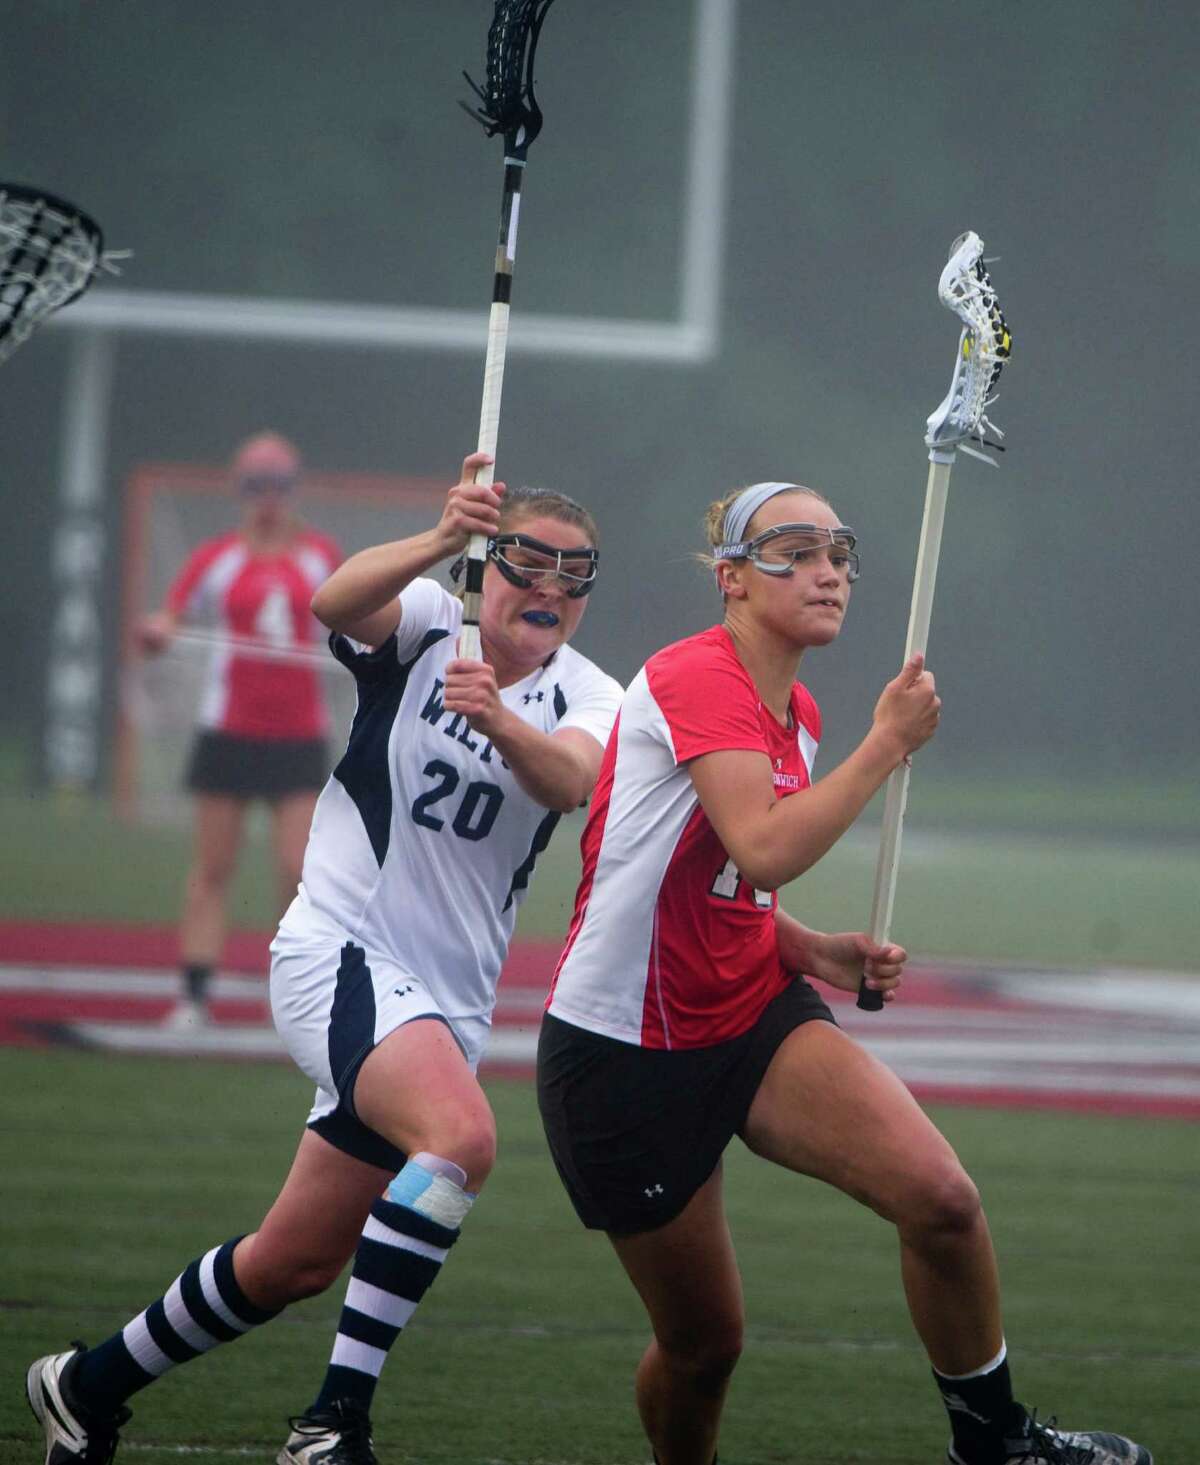 Wilton's Megan Boepple closes in on Greenwich's Emily Johnson as Greenwich and Wilton face off in the FCIAC Girls Lacrosse Semifinals at Dunning Field in New Canaan, Conn., May 21, 2012.